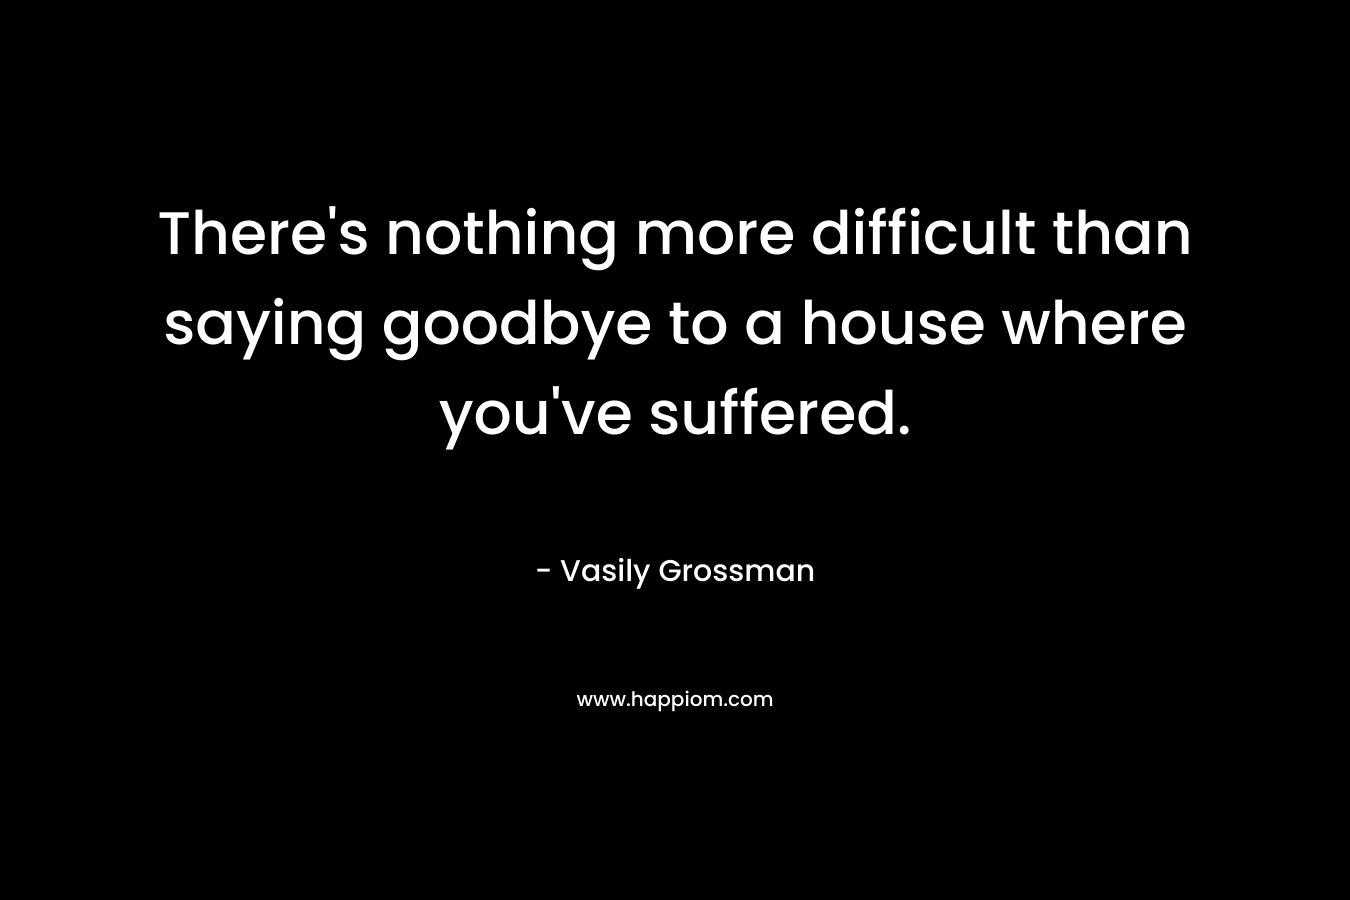 There's nothing more difficult than saying goodbye to a house where you've suffered.